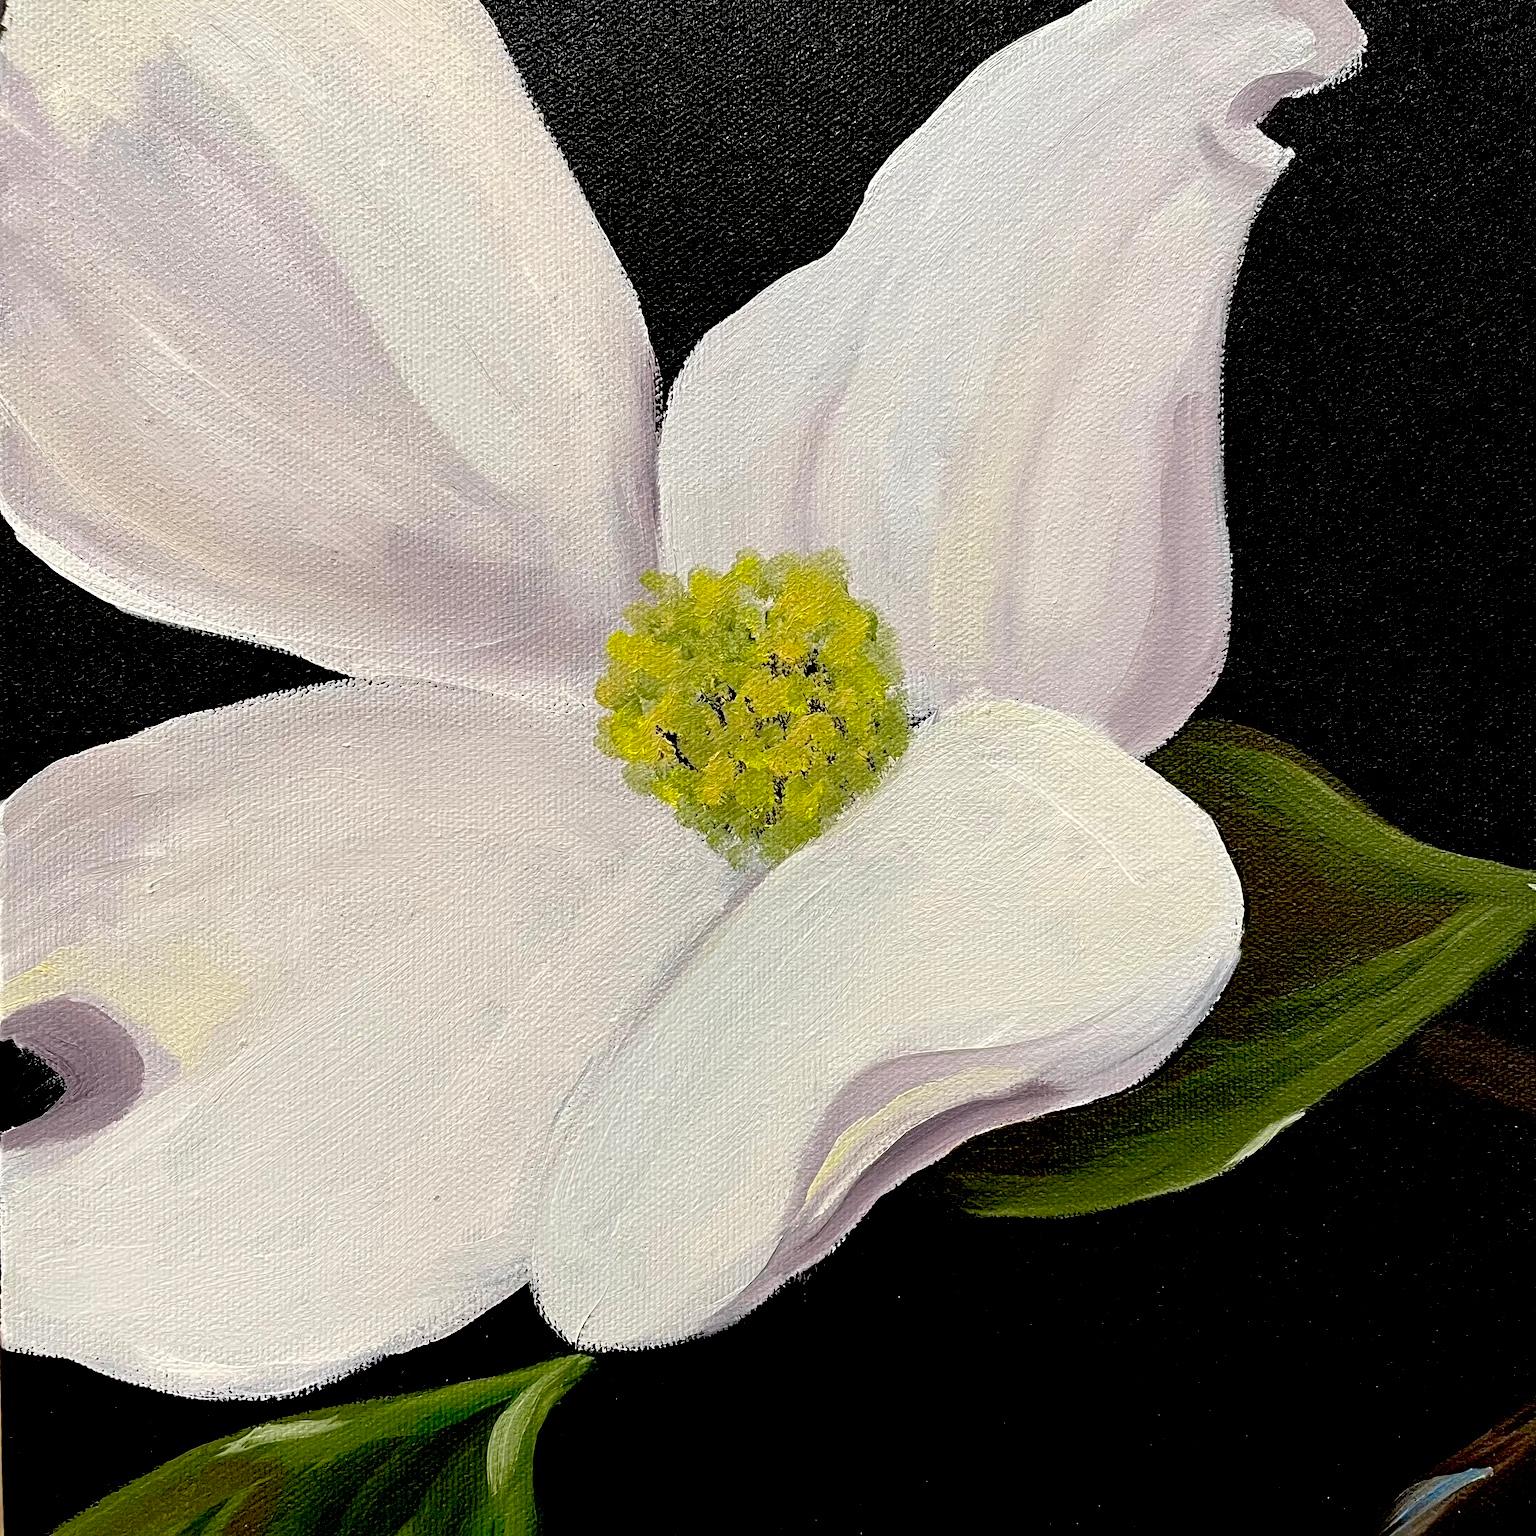 Ken Miller Still-Life Painting - White Flowers and Green Leaves against a Black Background. Title - Wild Dogwood